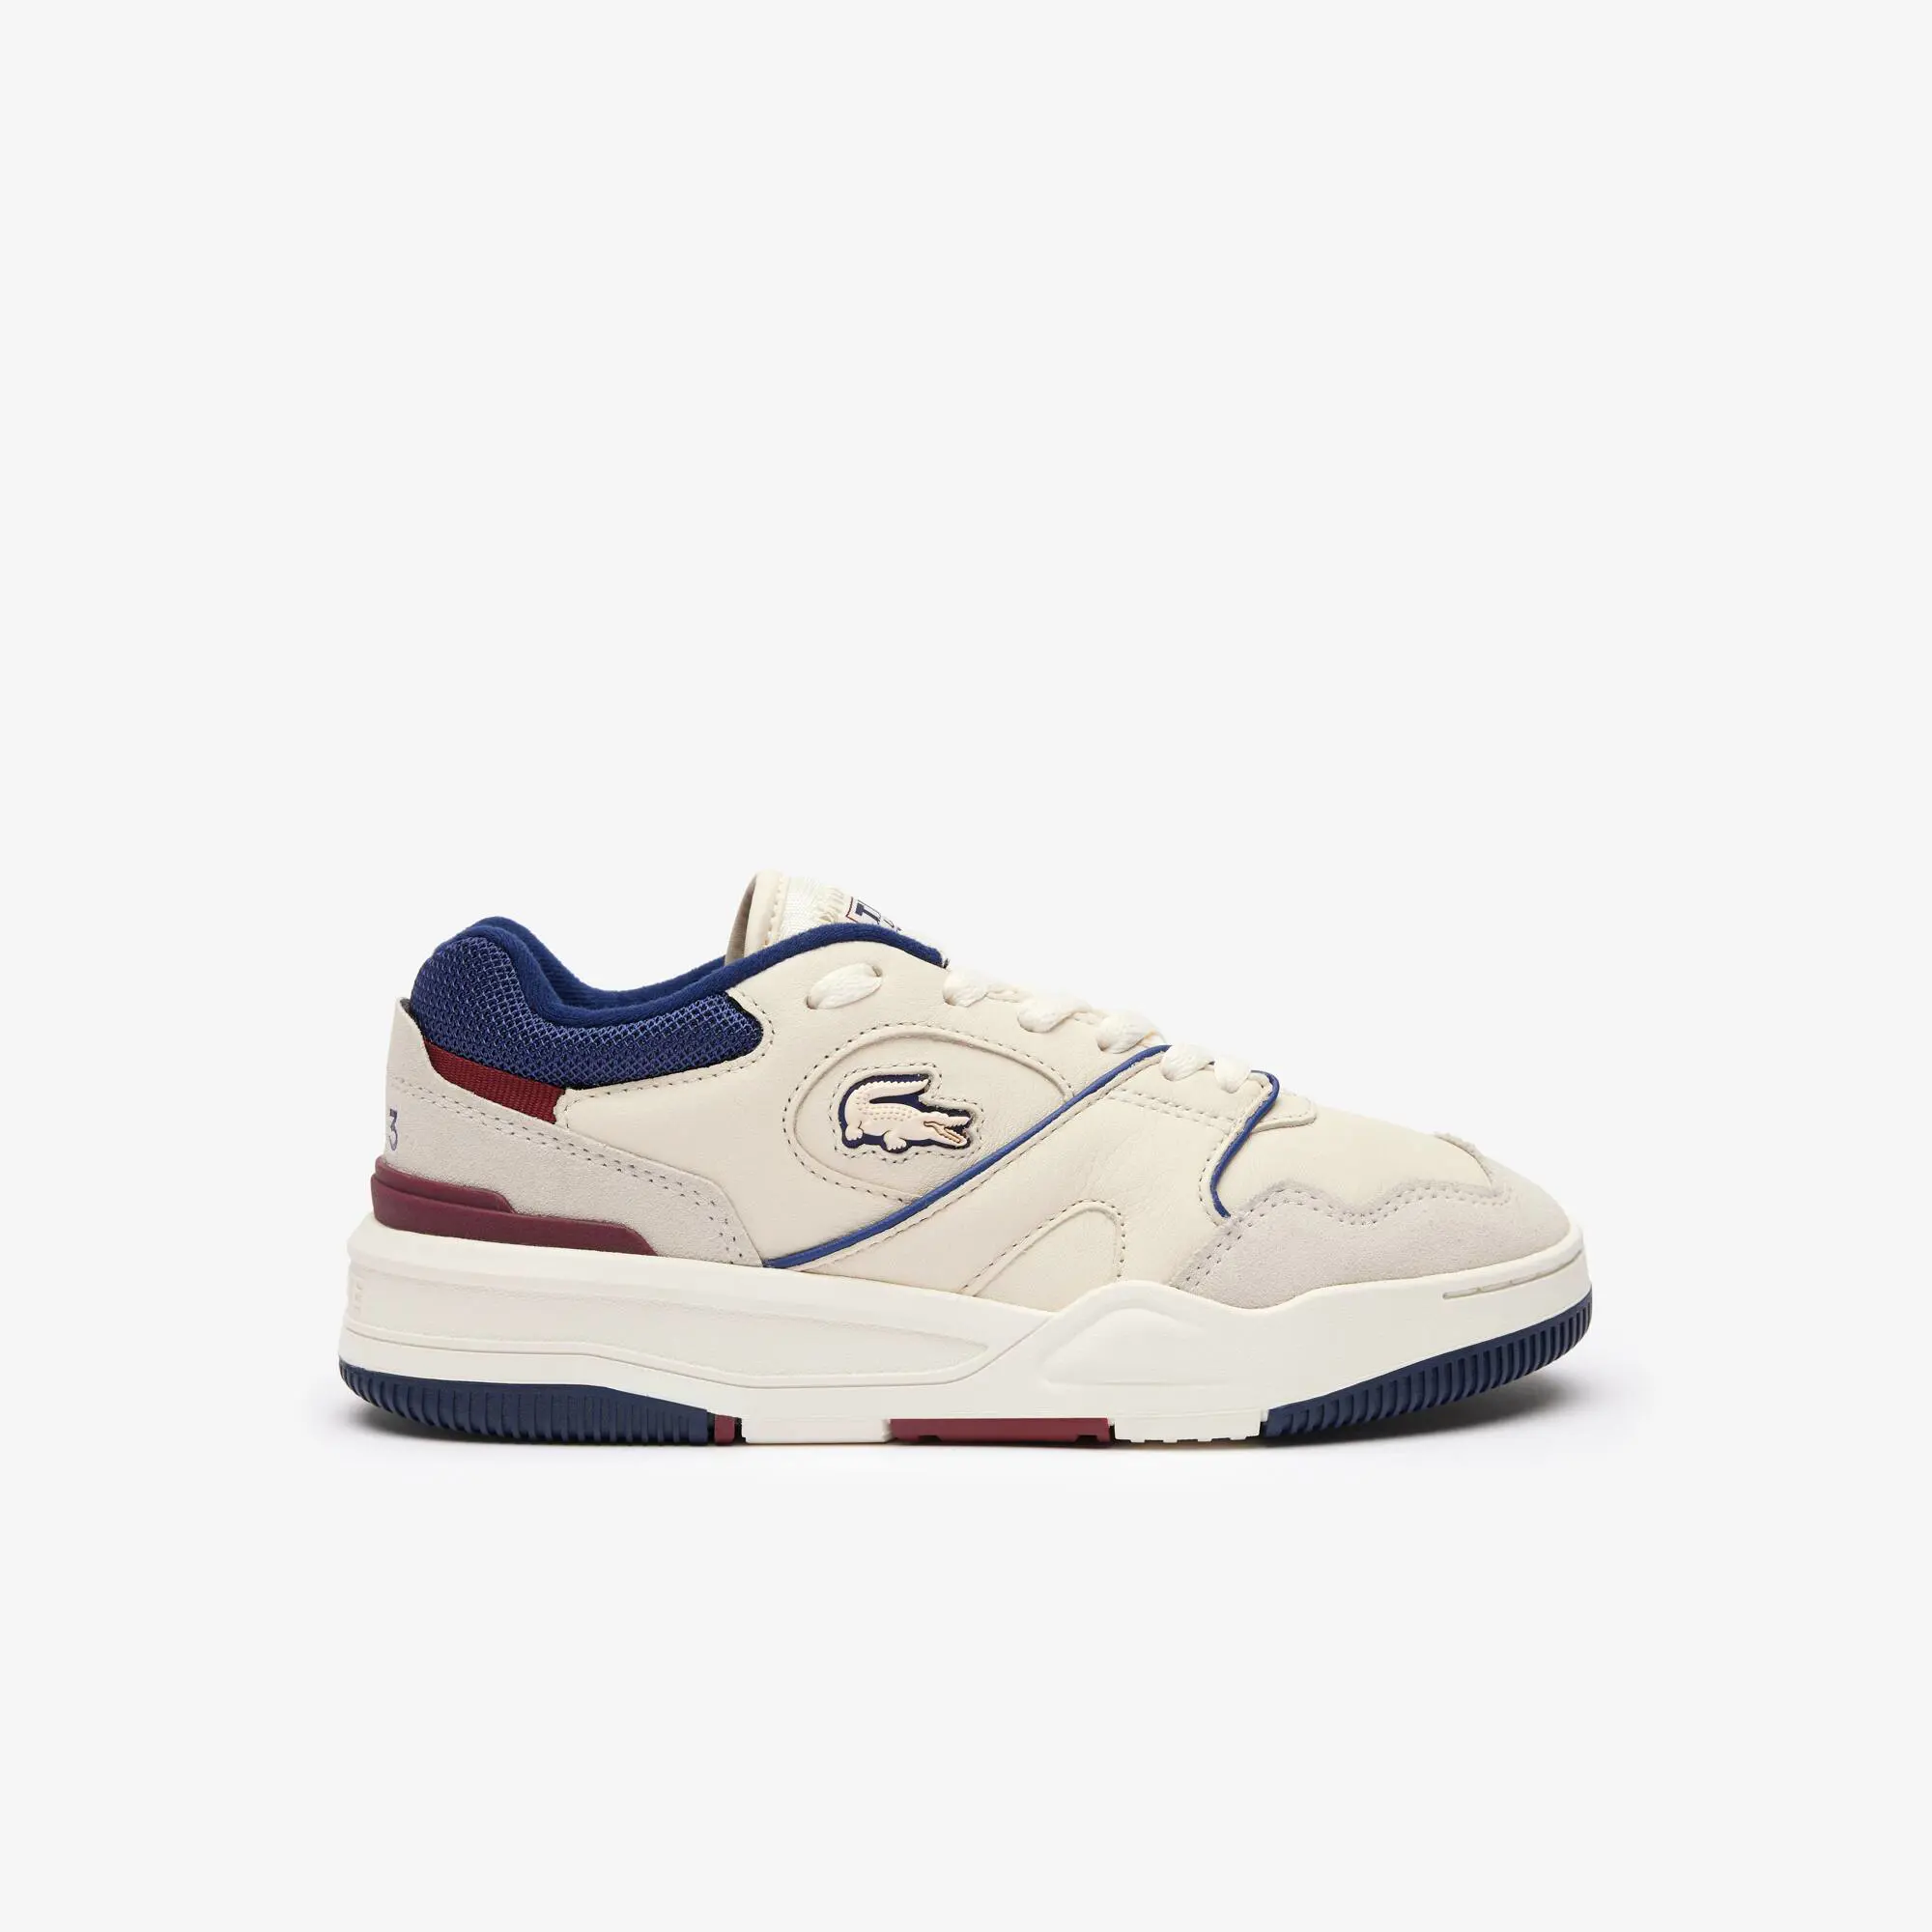 Lacoste Women’s Lineshot Mesh Collar Leather Trainers. 1